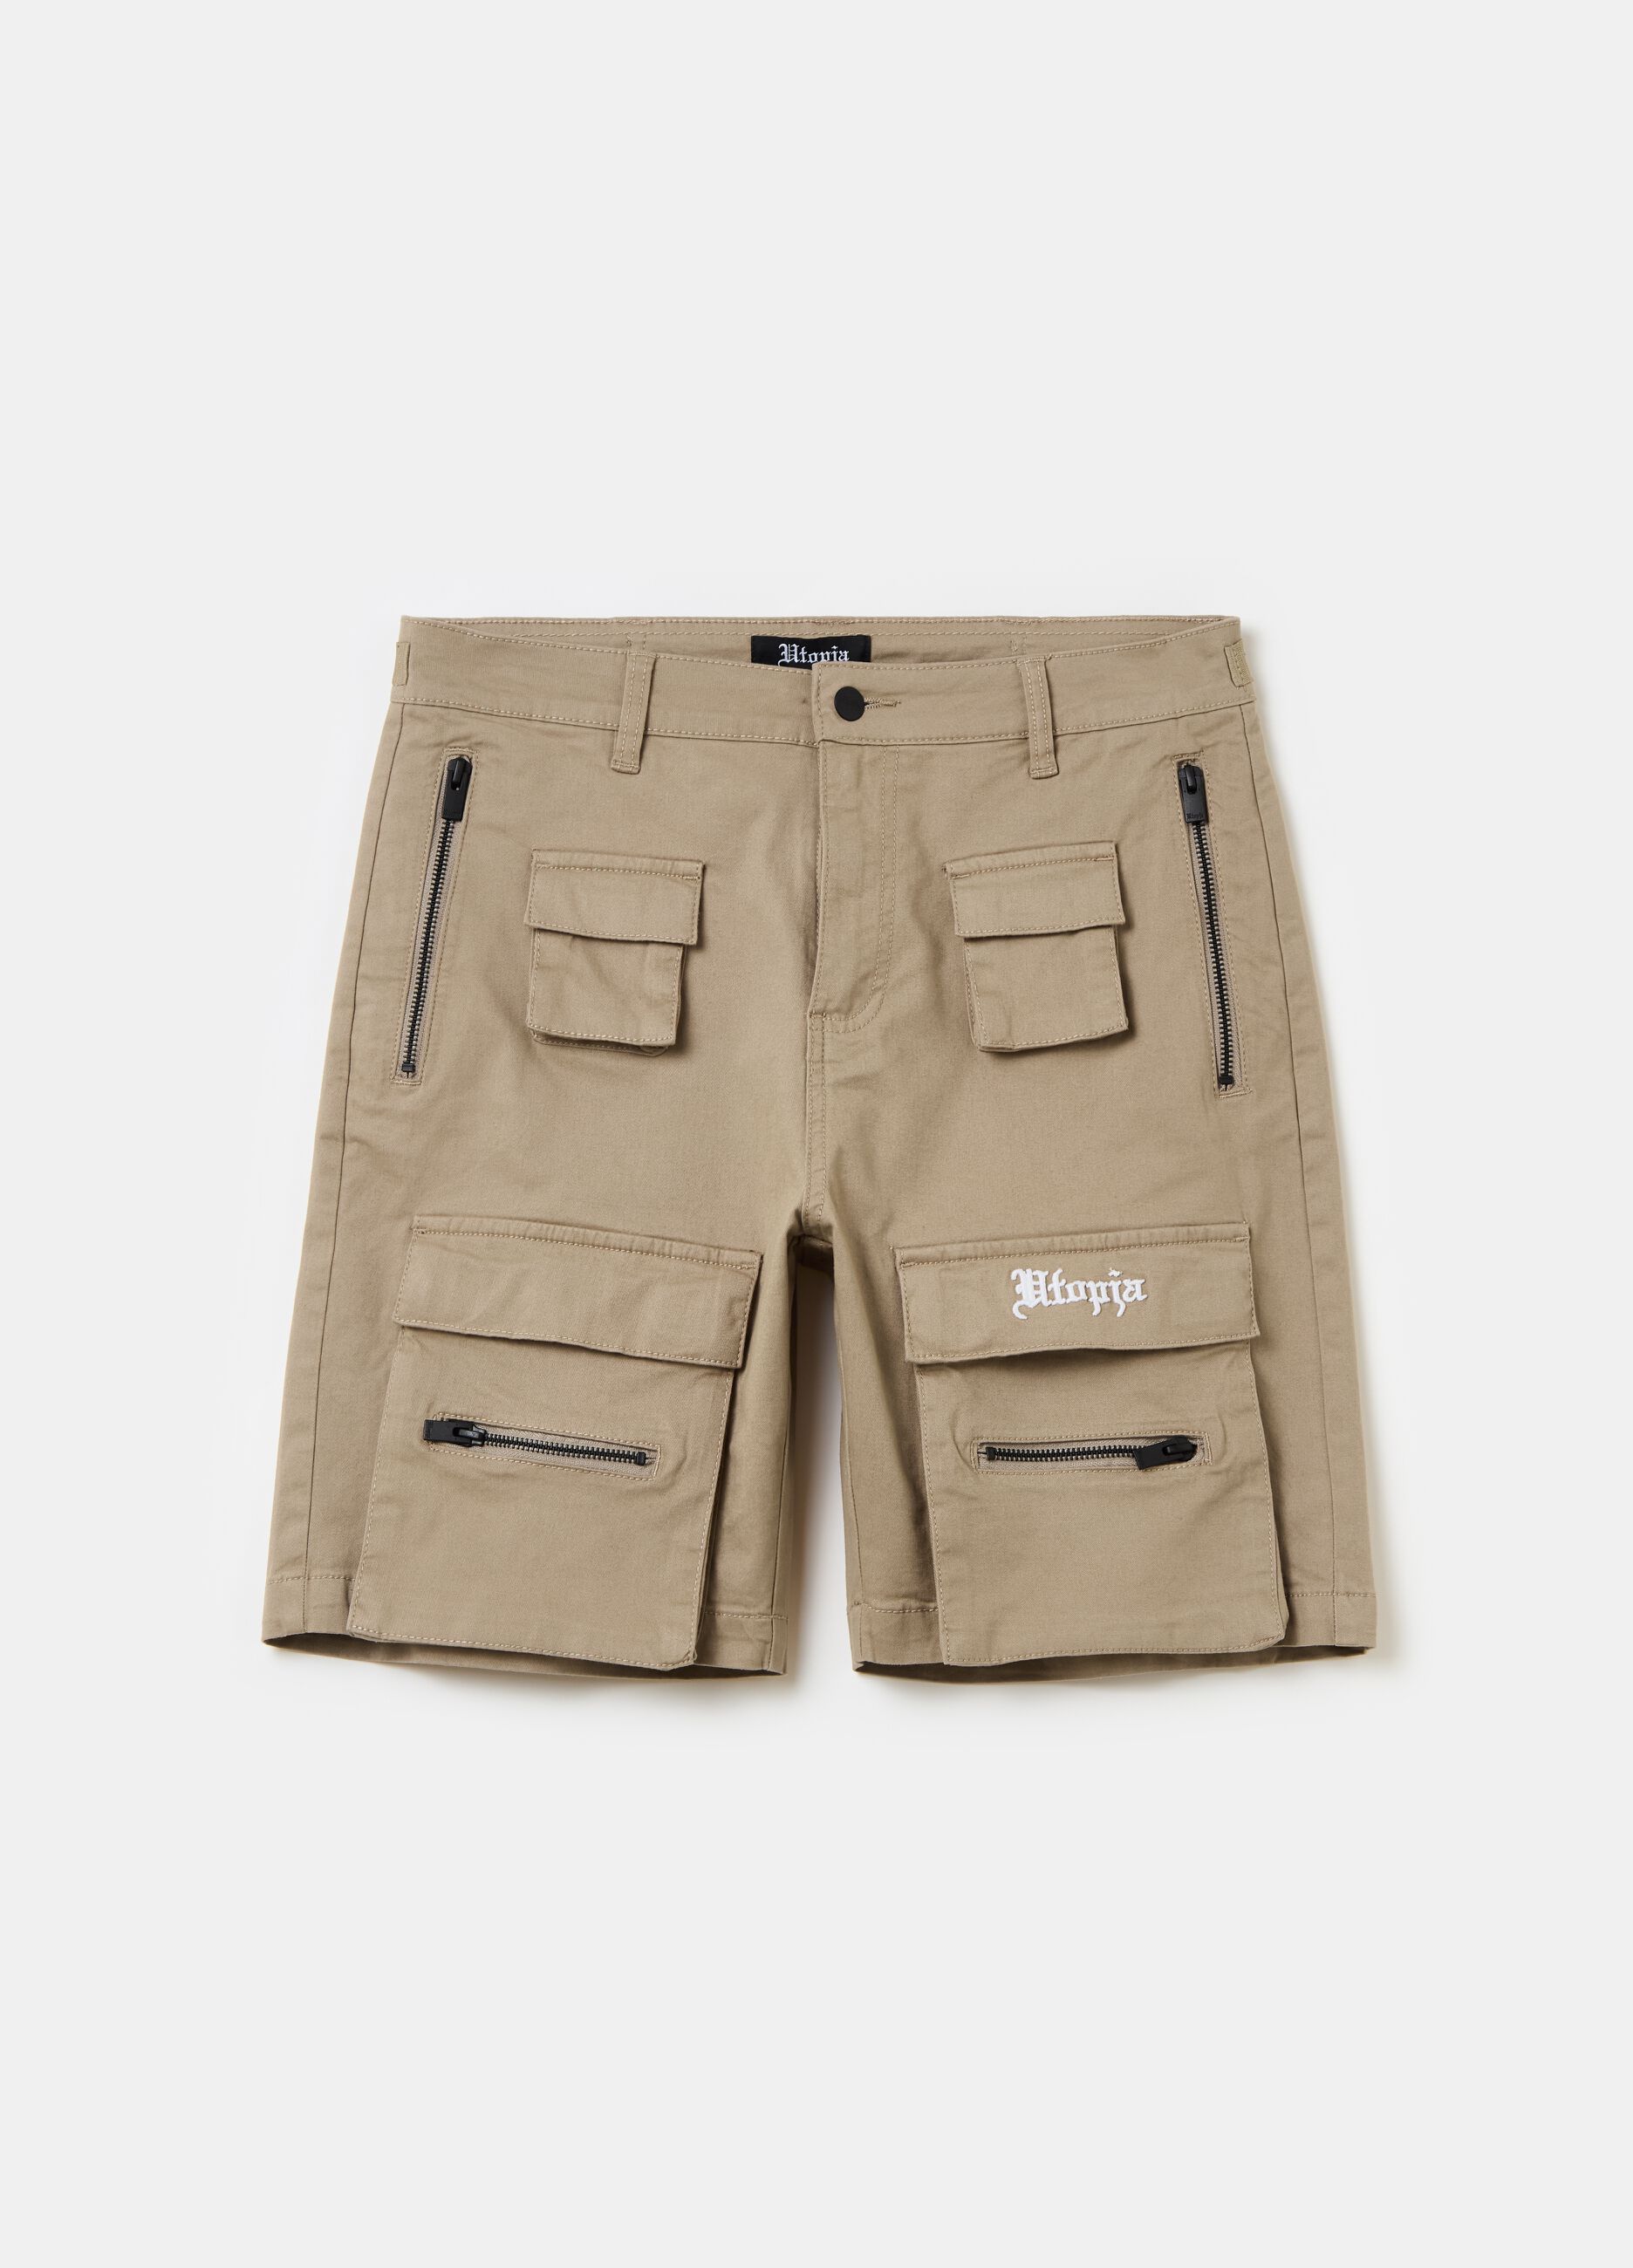 UTOPJA FOR THE SEA BEYOND cargo Bermuda shorts with logo embroidery